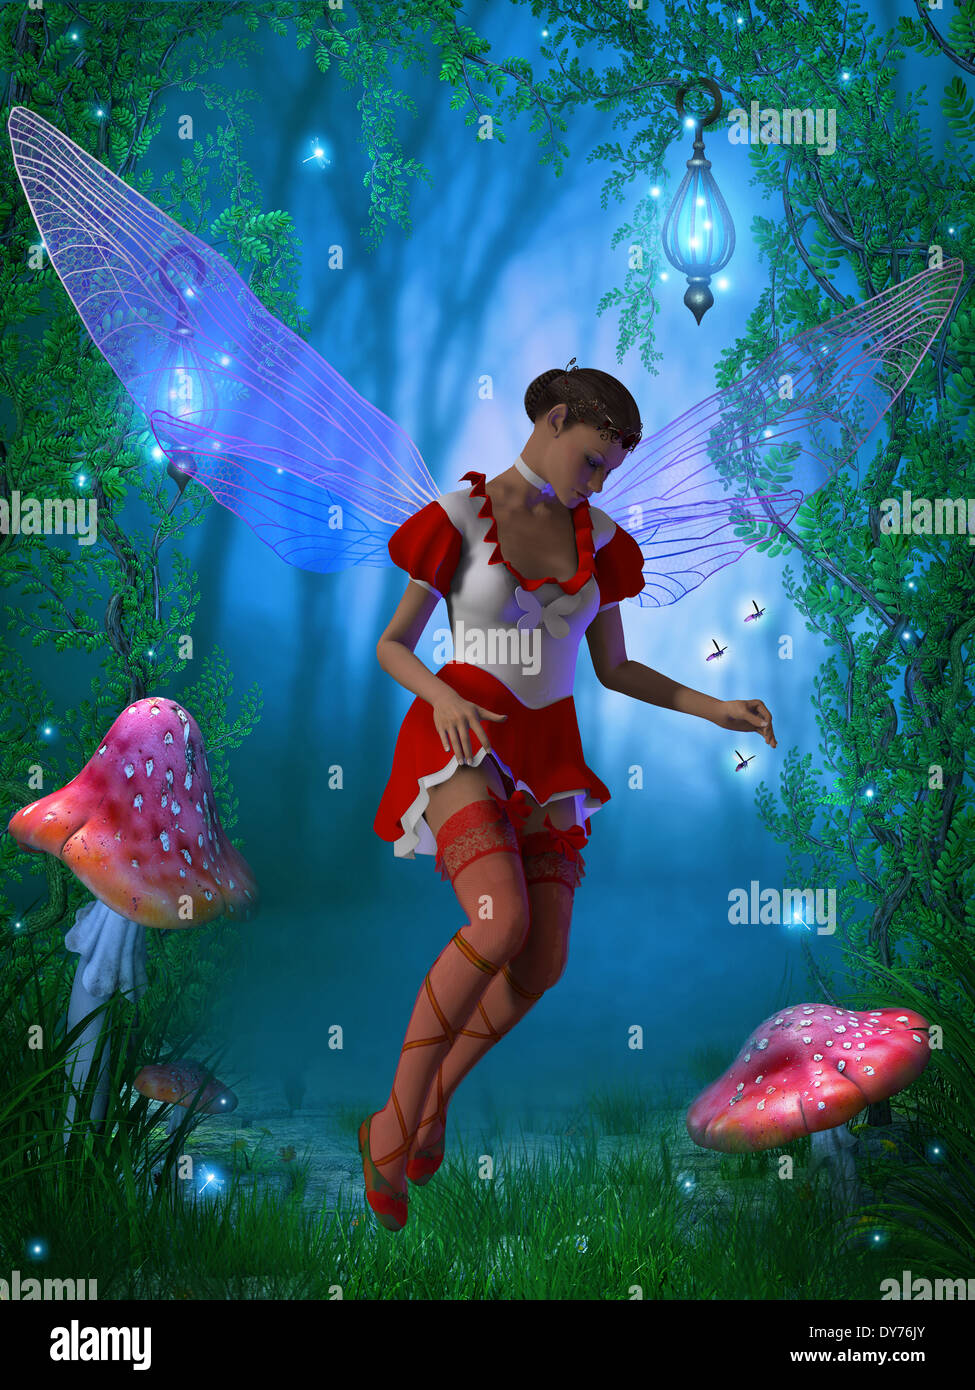 A flying fairy tries to capture a glow fly in the magical forest. Stock Photo